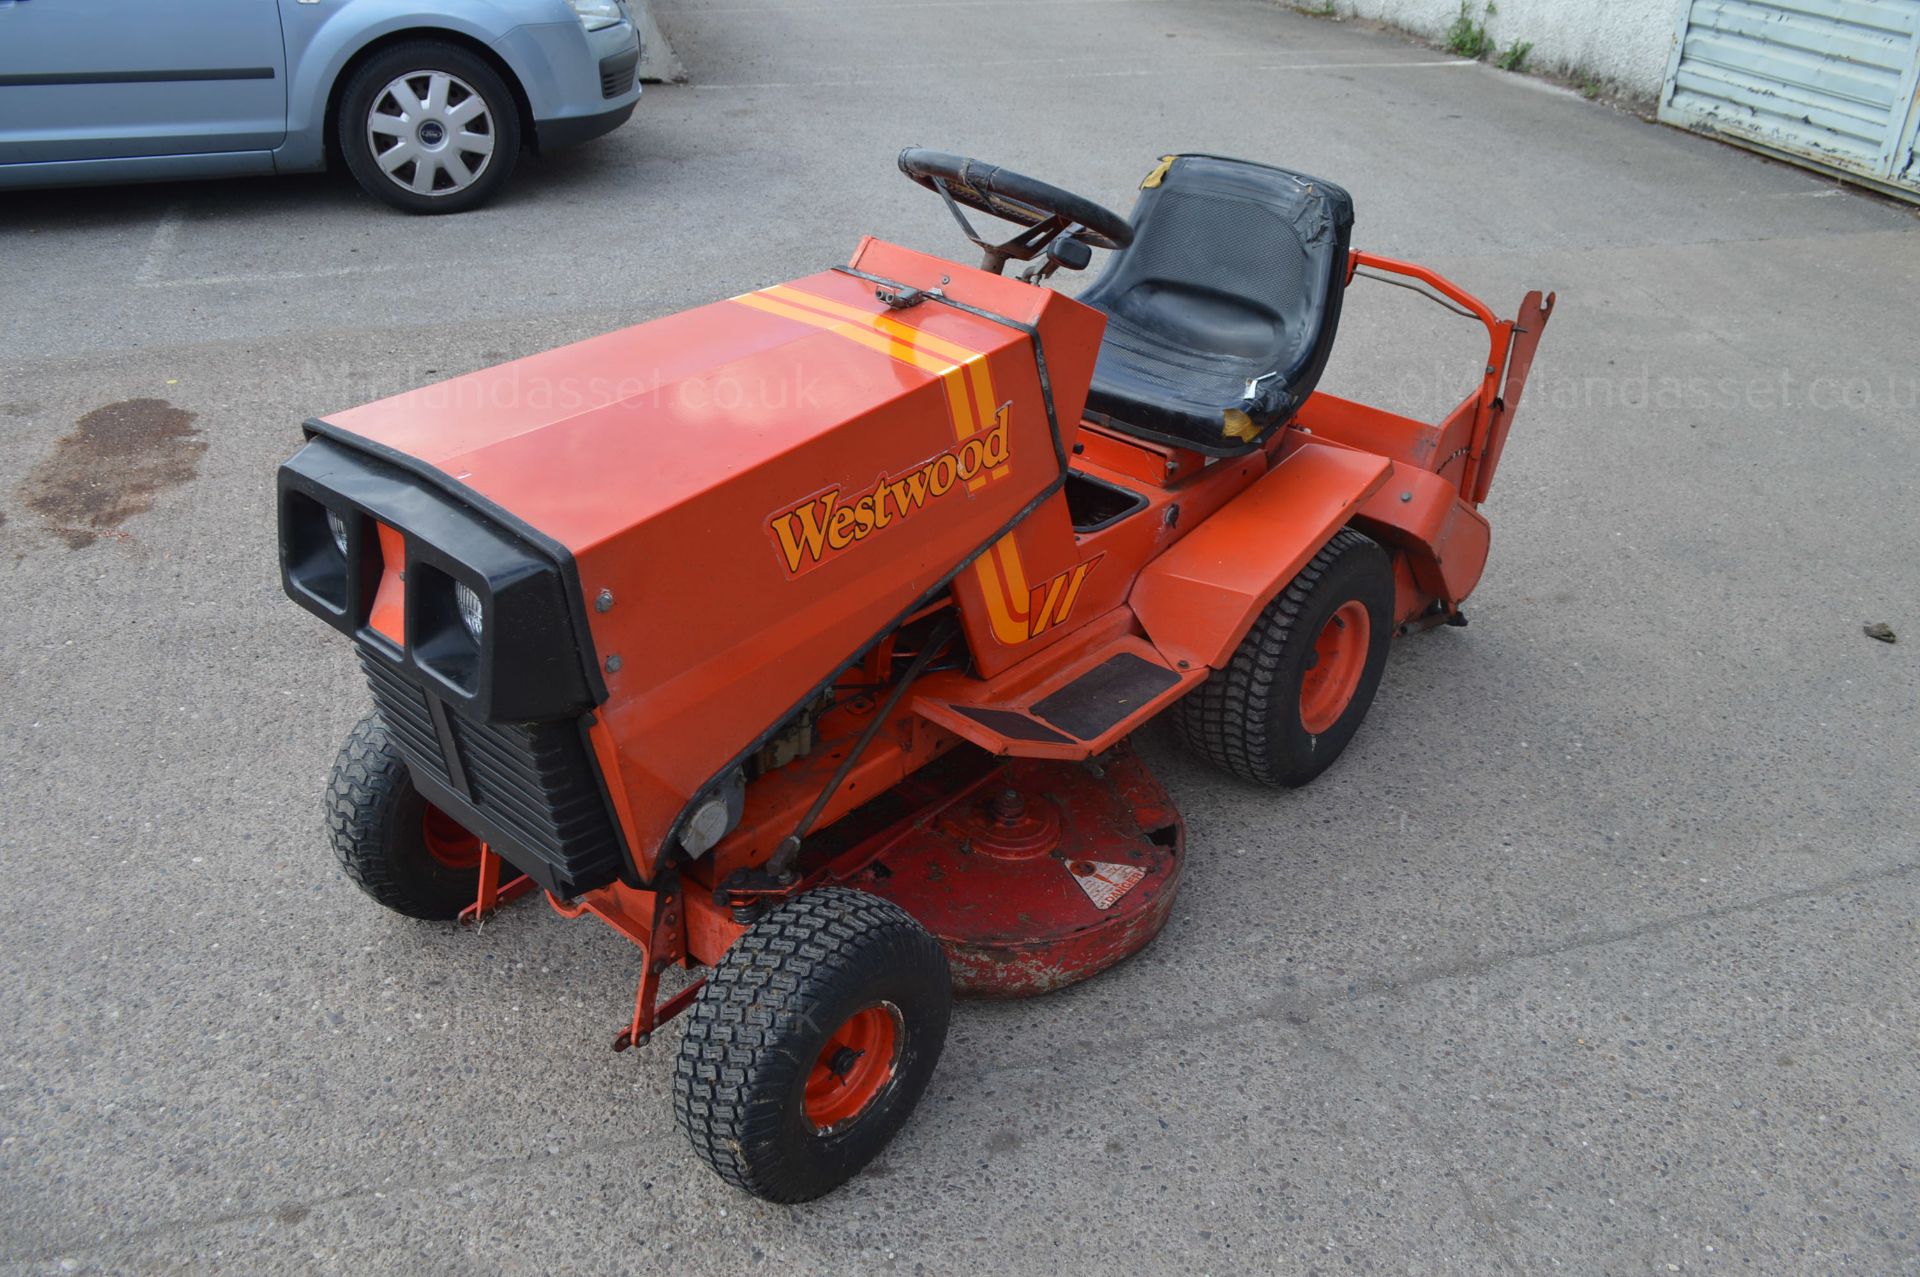 WESTWOOD T1200 RIDE ON MOWER - Image 3 of 12